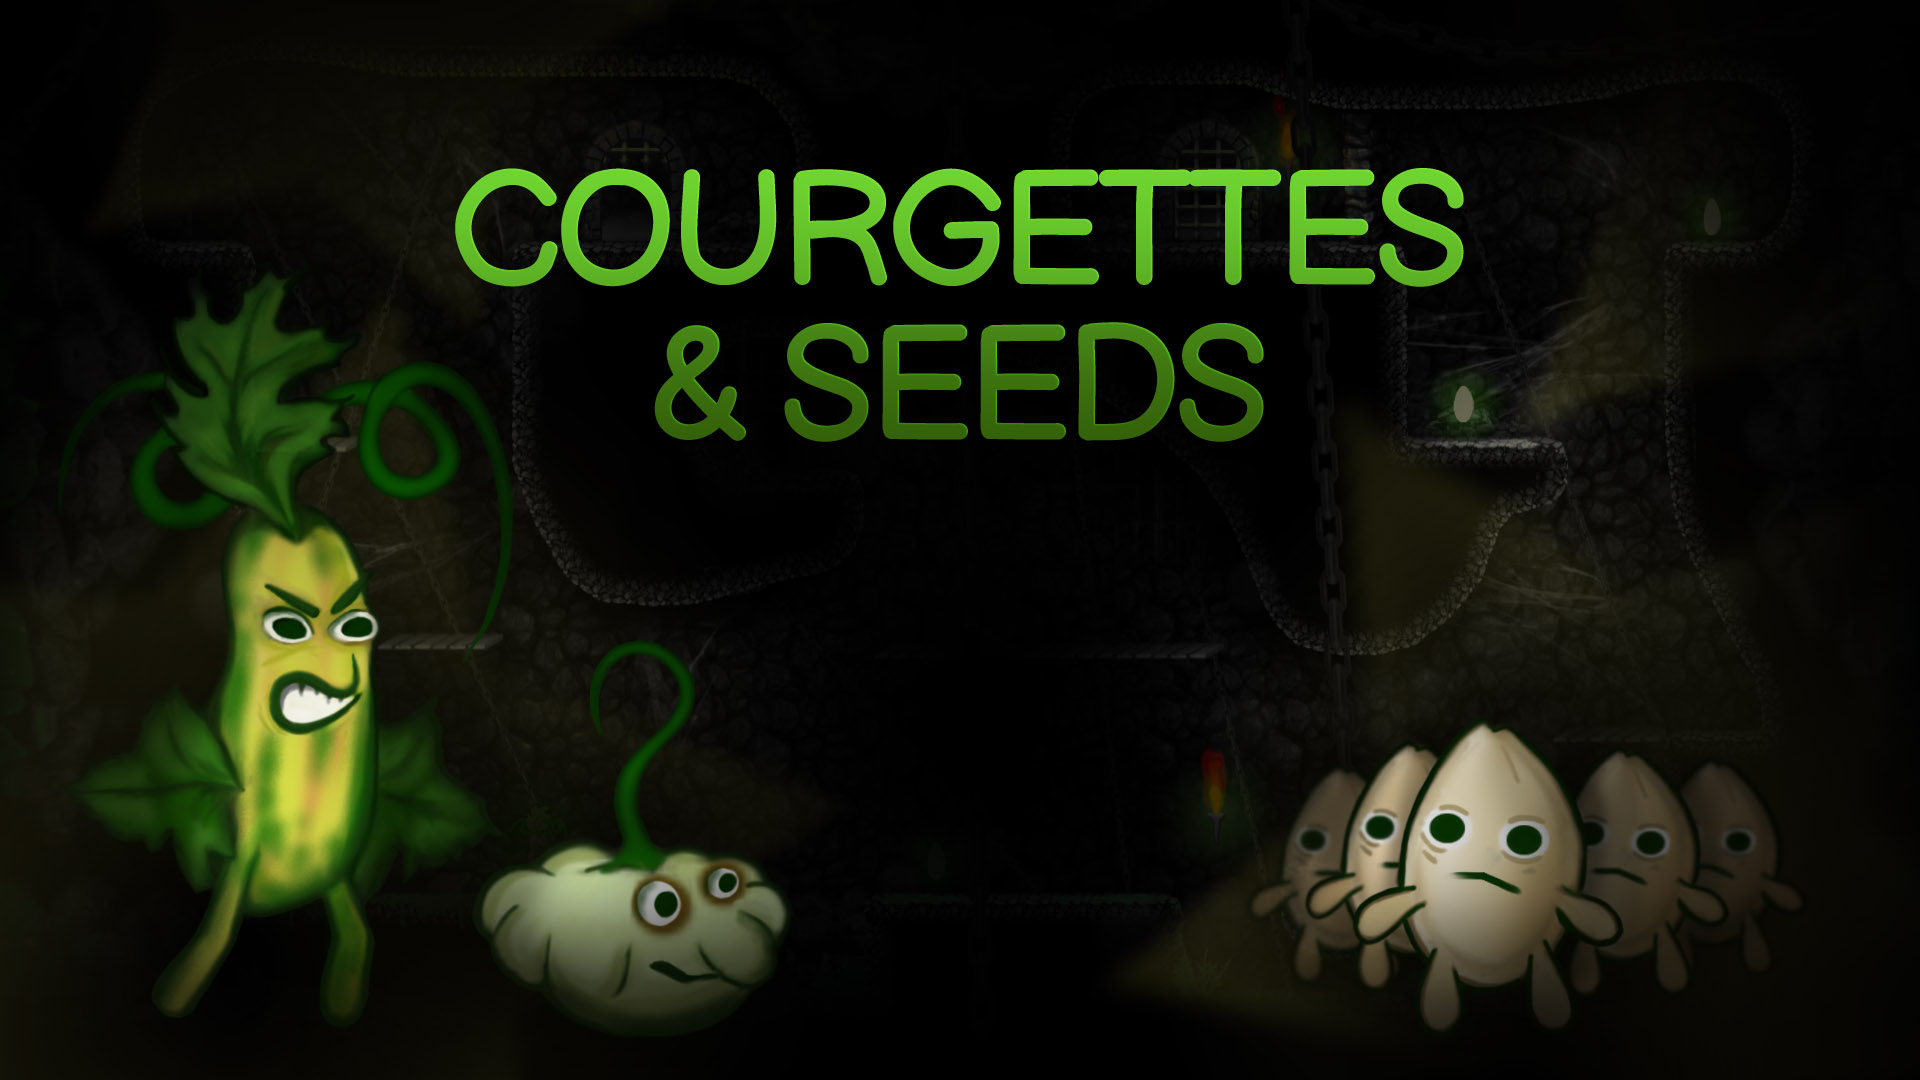 Courgettes & Seeds